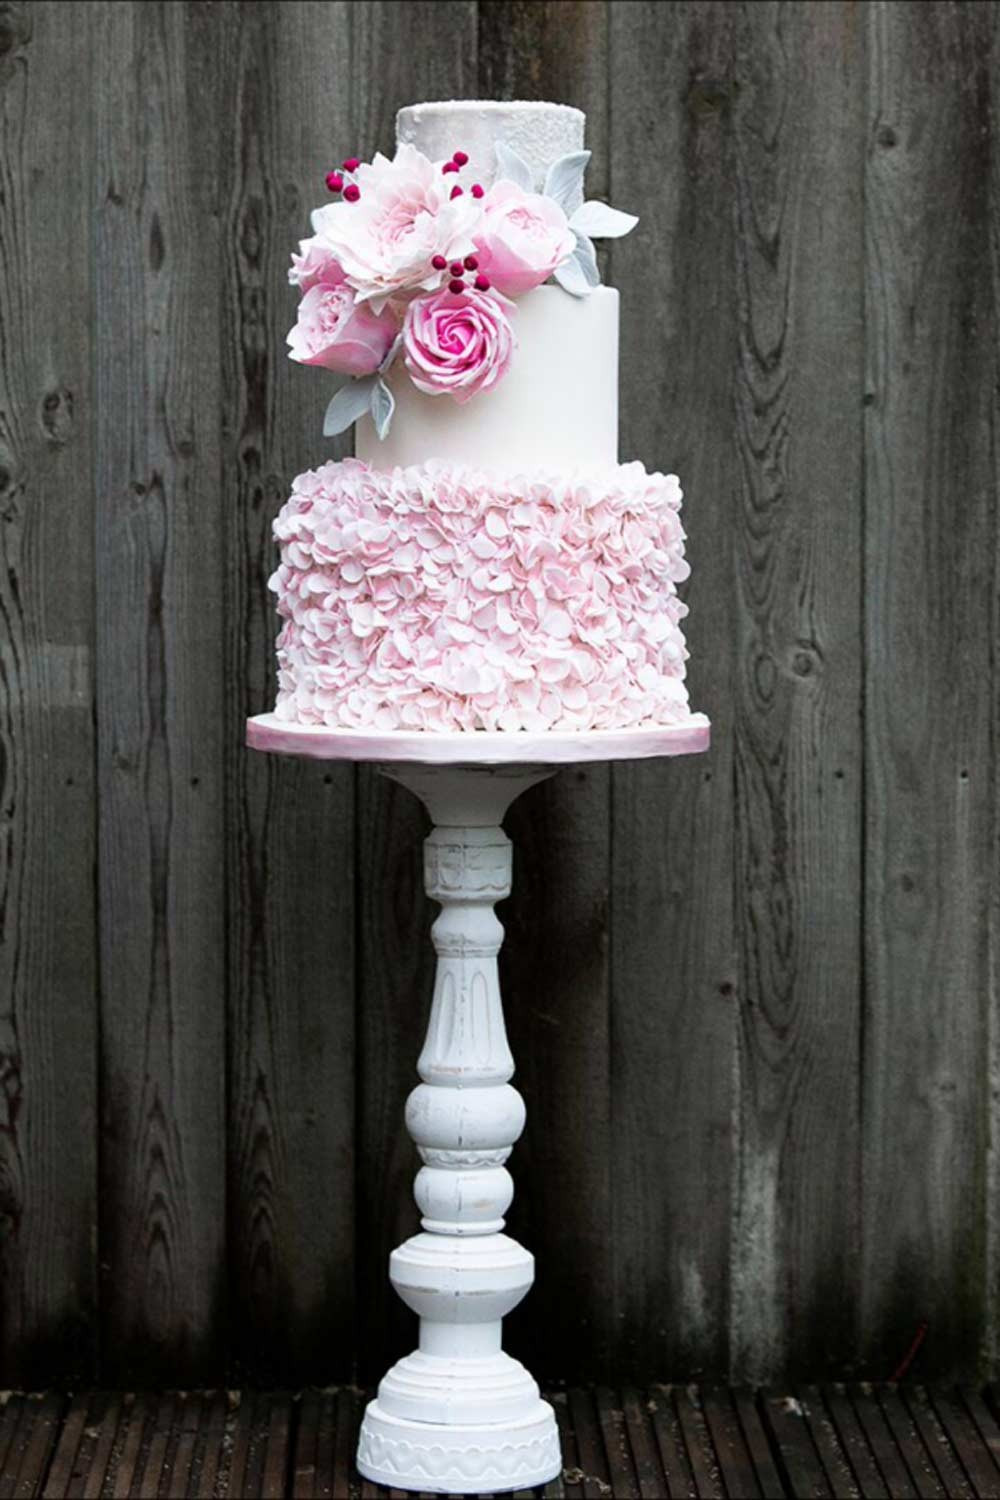 Wedding Cakes With Prices
 Wedding Cake Prices Guide for bud s from £100 to over £